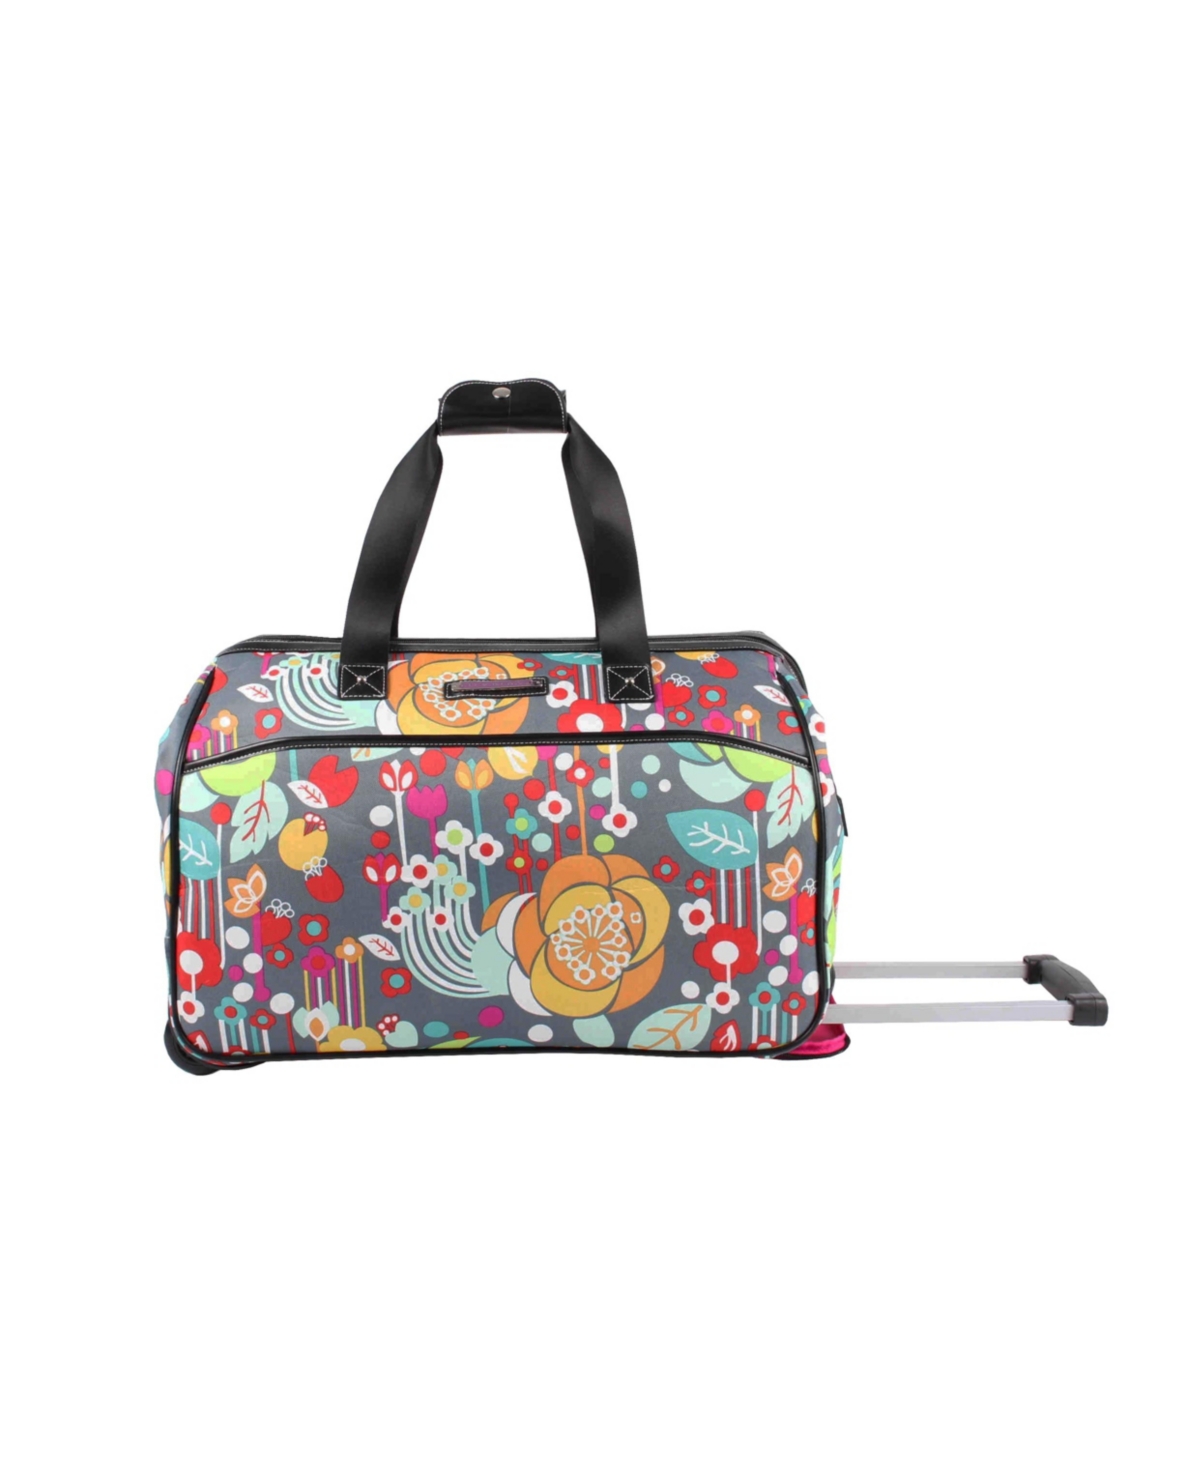 Carry-On Softside Rolling Duffel Bag - Bliss